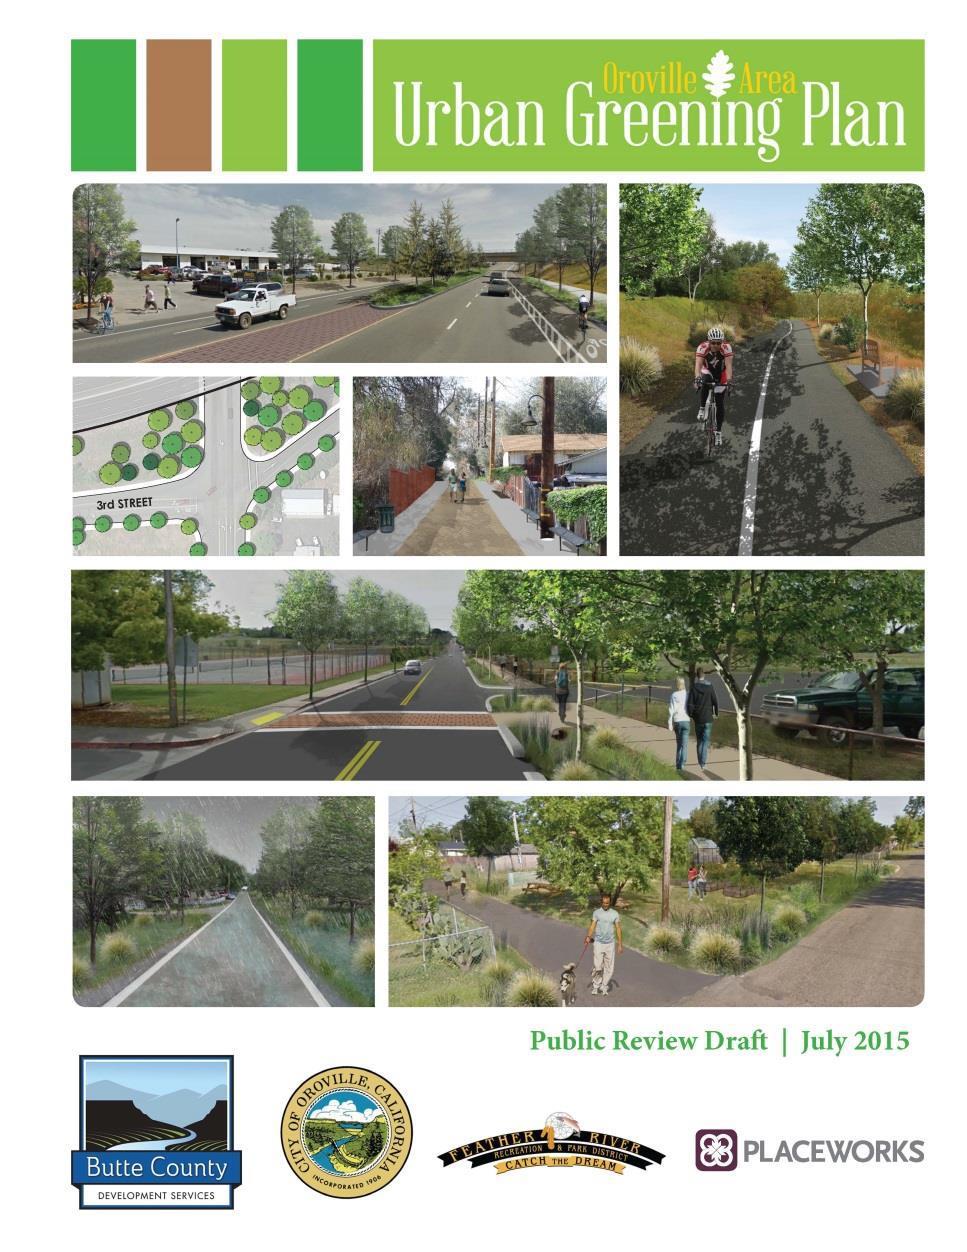 Funding was provided by the Strategic Growth Council through the Urban Greening Grant program, funded by Proposition 84, the Safe Drinking Water, Water Quality and Supply, Flood Control, River and